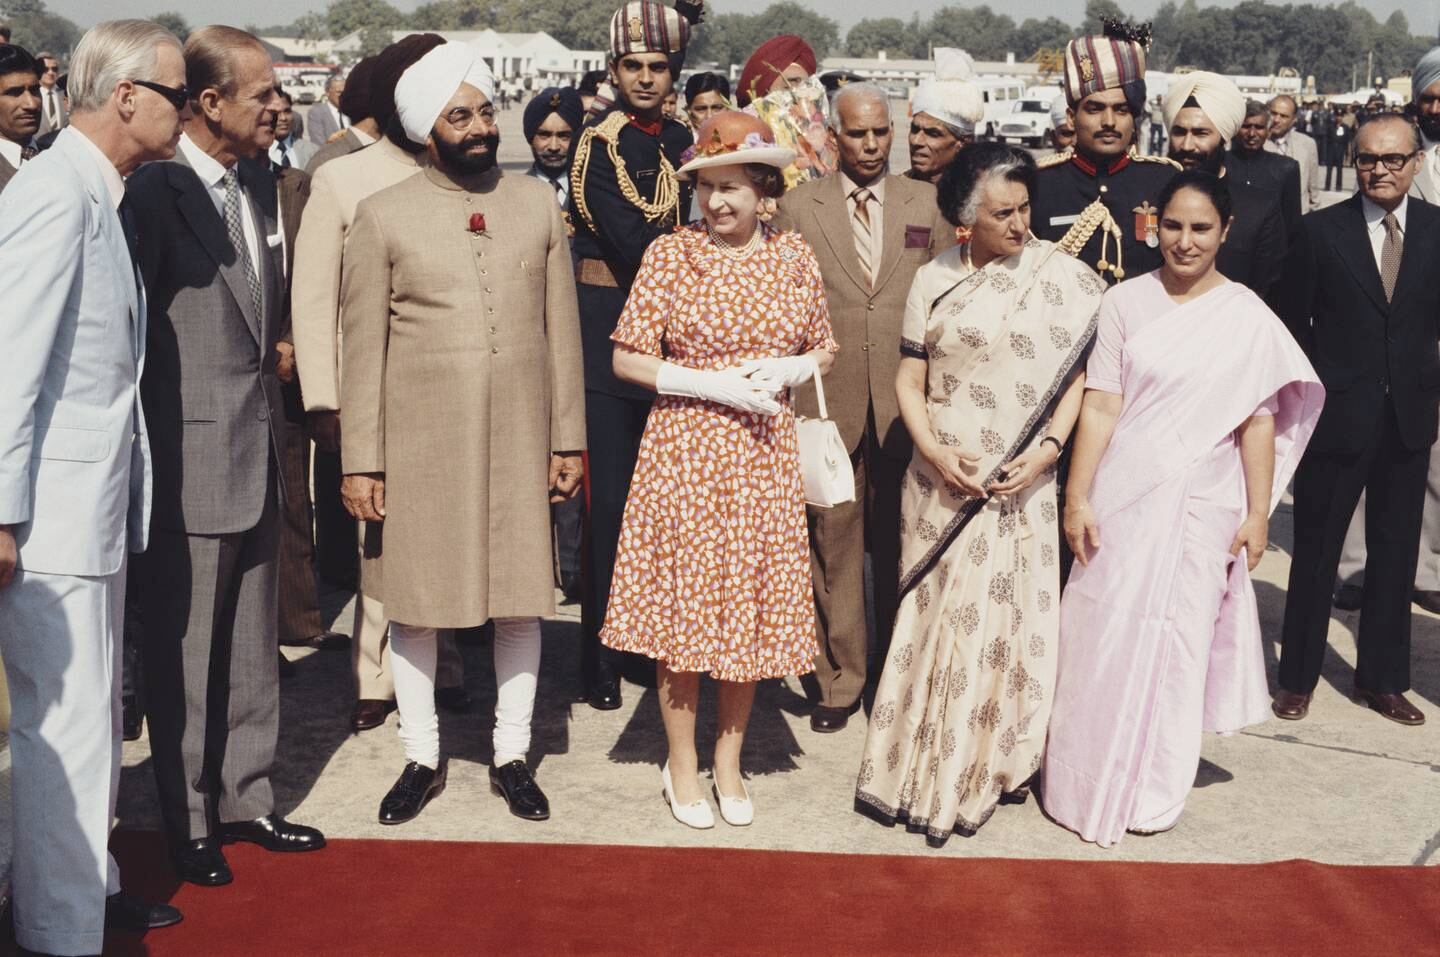 Queen Elizabeth II and Prince Philip are met by Indian Prime Minister Indira Gandhi and President Zail Singh at Palam Airport, New Delhi, during a Commonwealth tour of India, November 17, 1983.  Getty Images